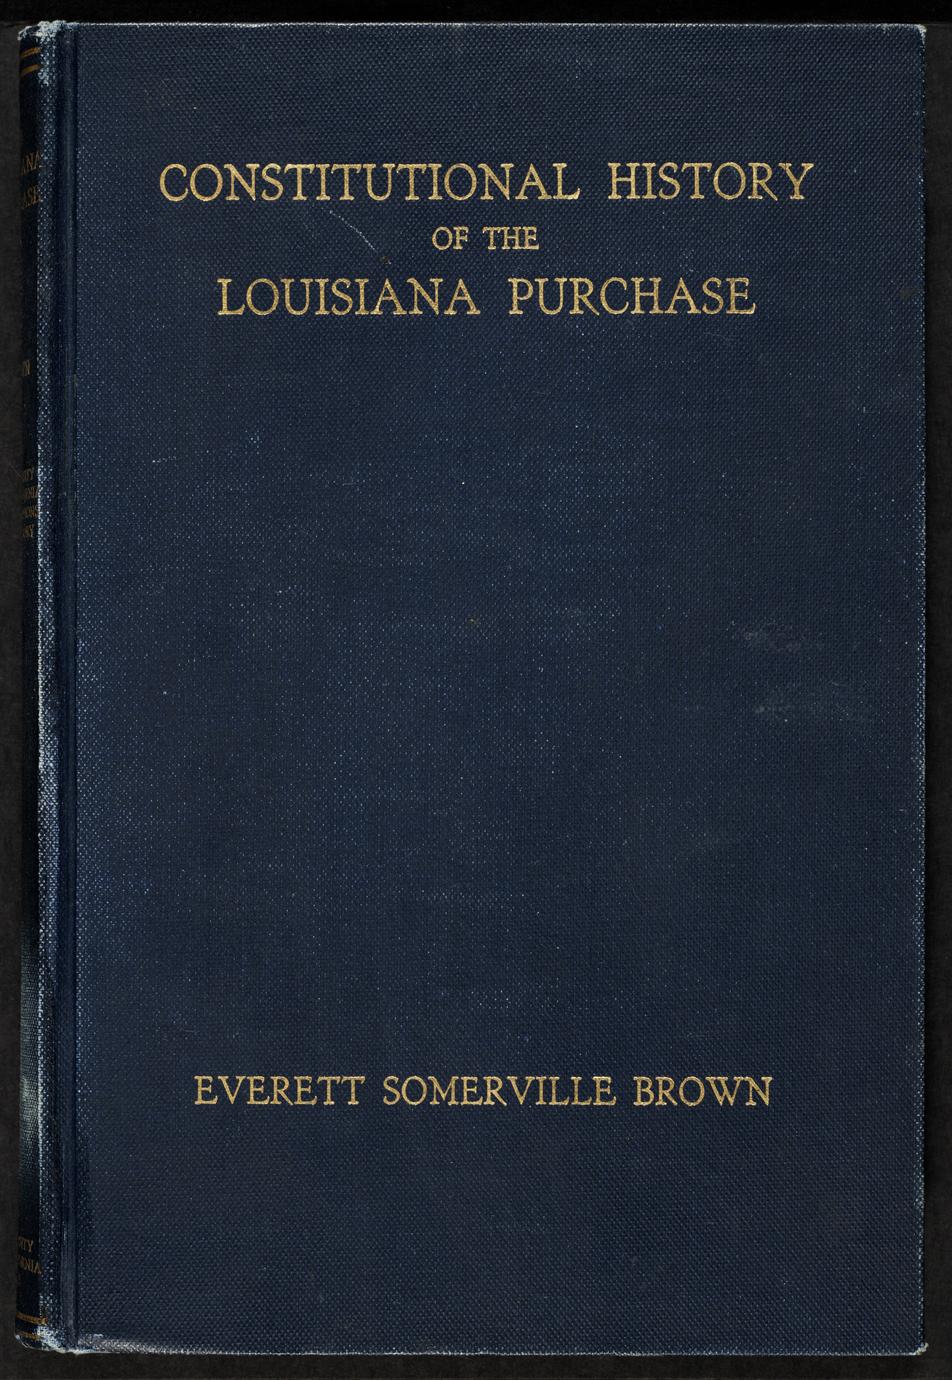 The constitutional history of the Louisiana Purchase, 1803-1812 (1 of 2)